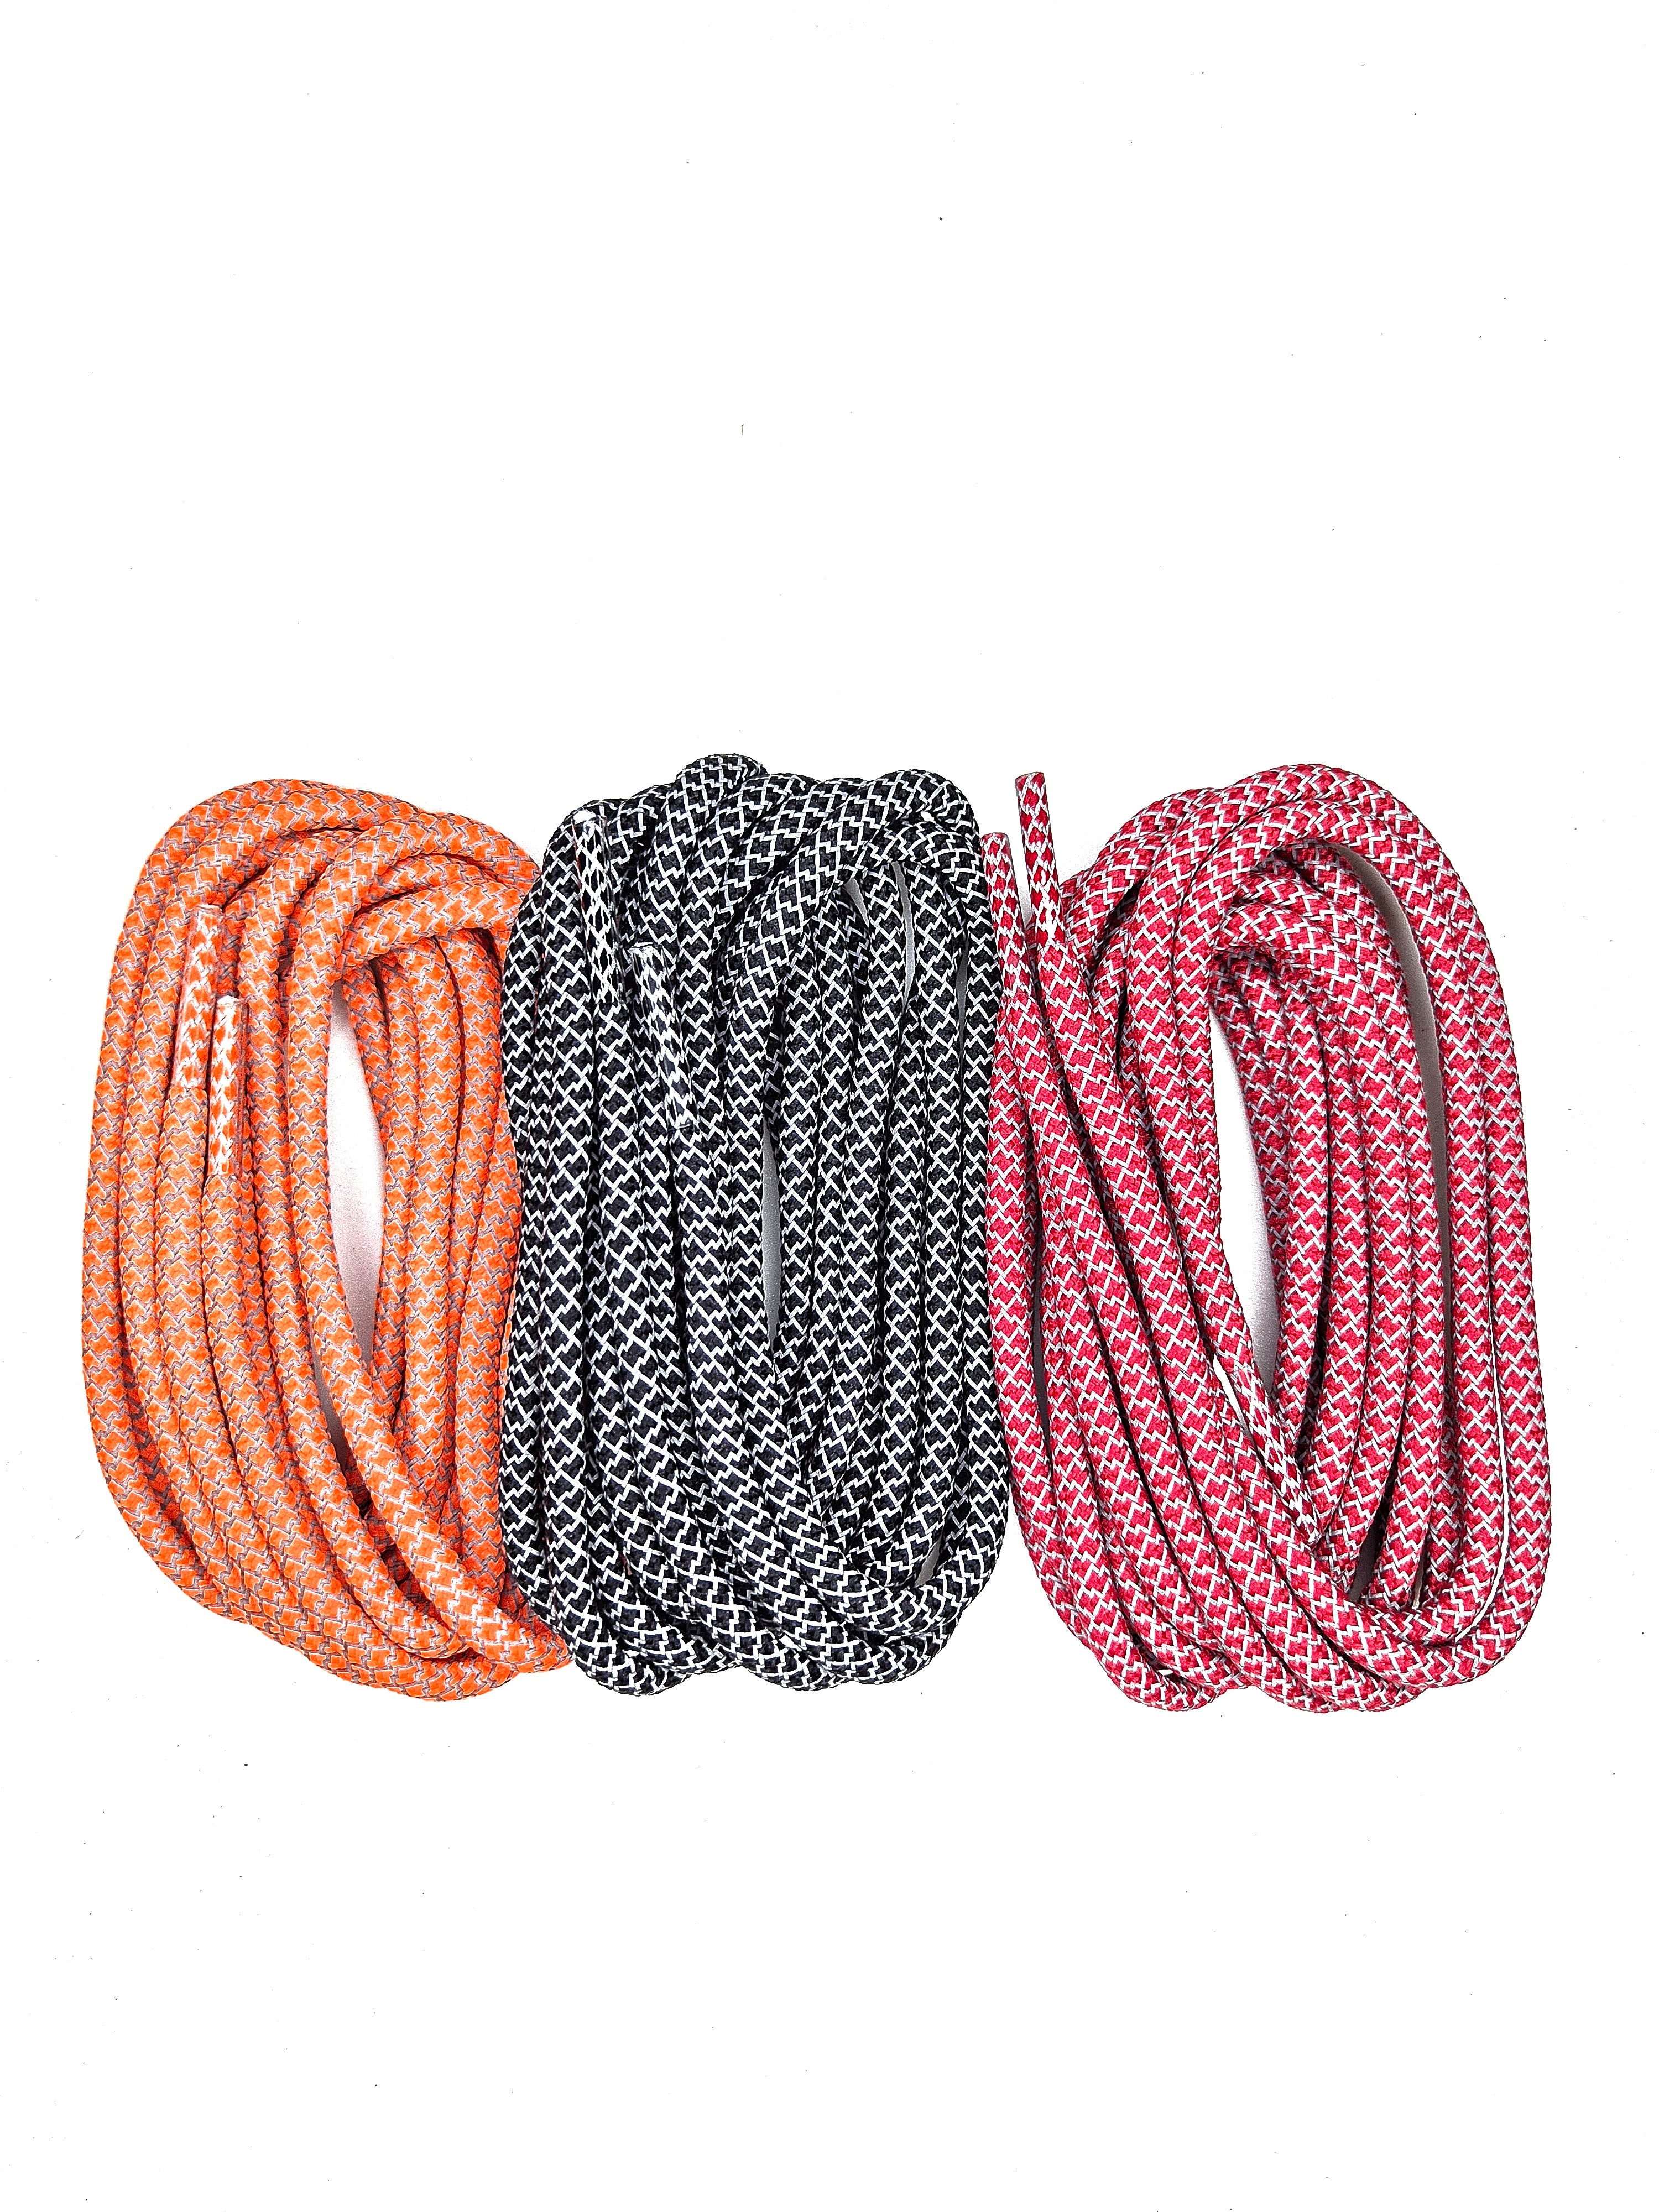 Yeezy 350 style Reflective rope laces 3 pairs combo pack by TGLC